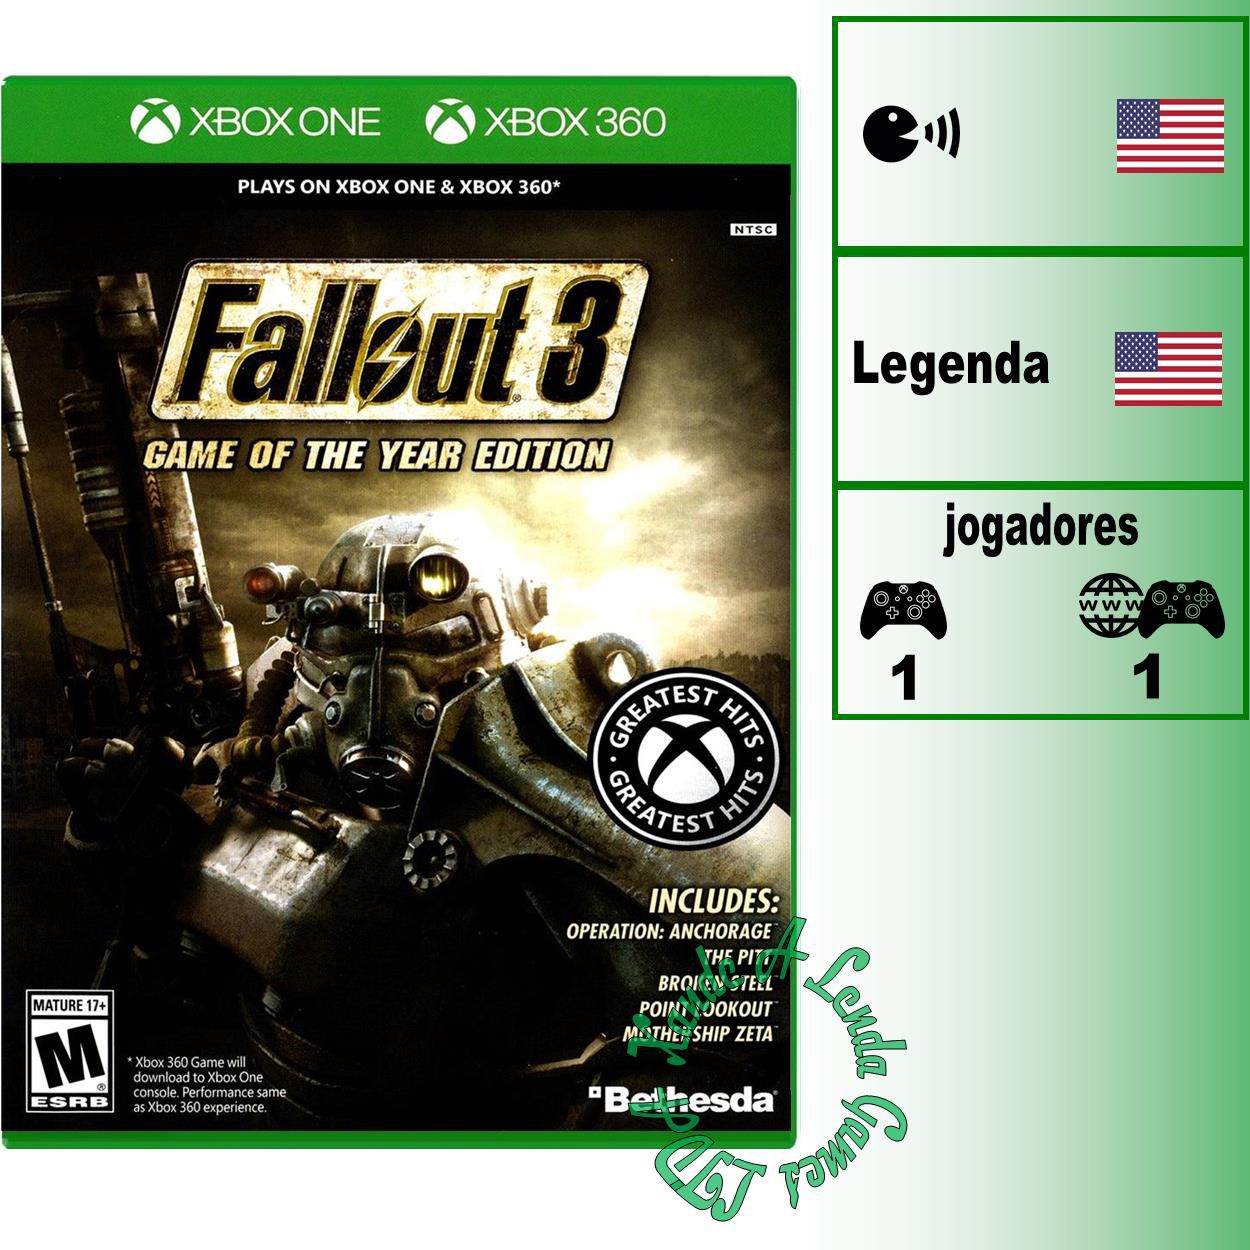 Fallout 3 Game of The Year Edition - Xbox 360 / Xbox One